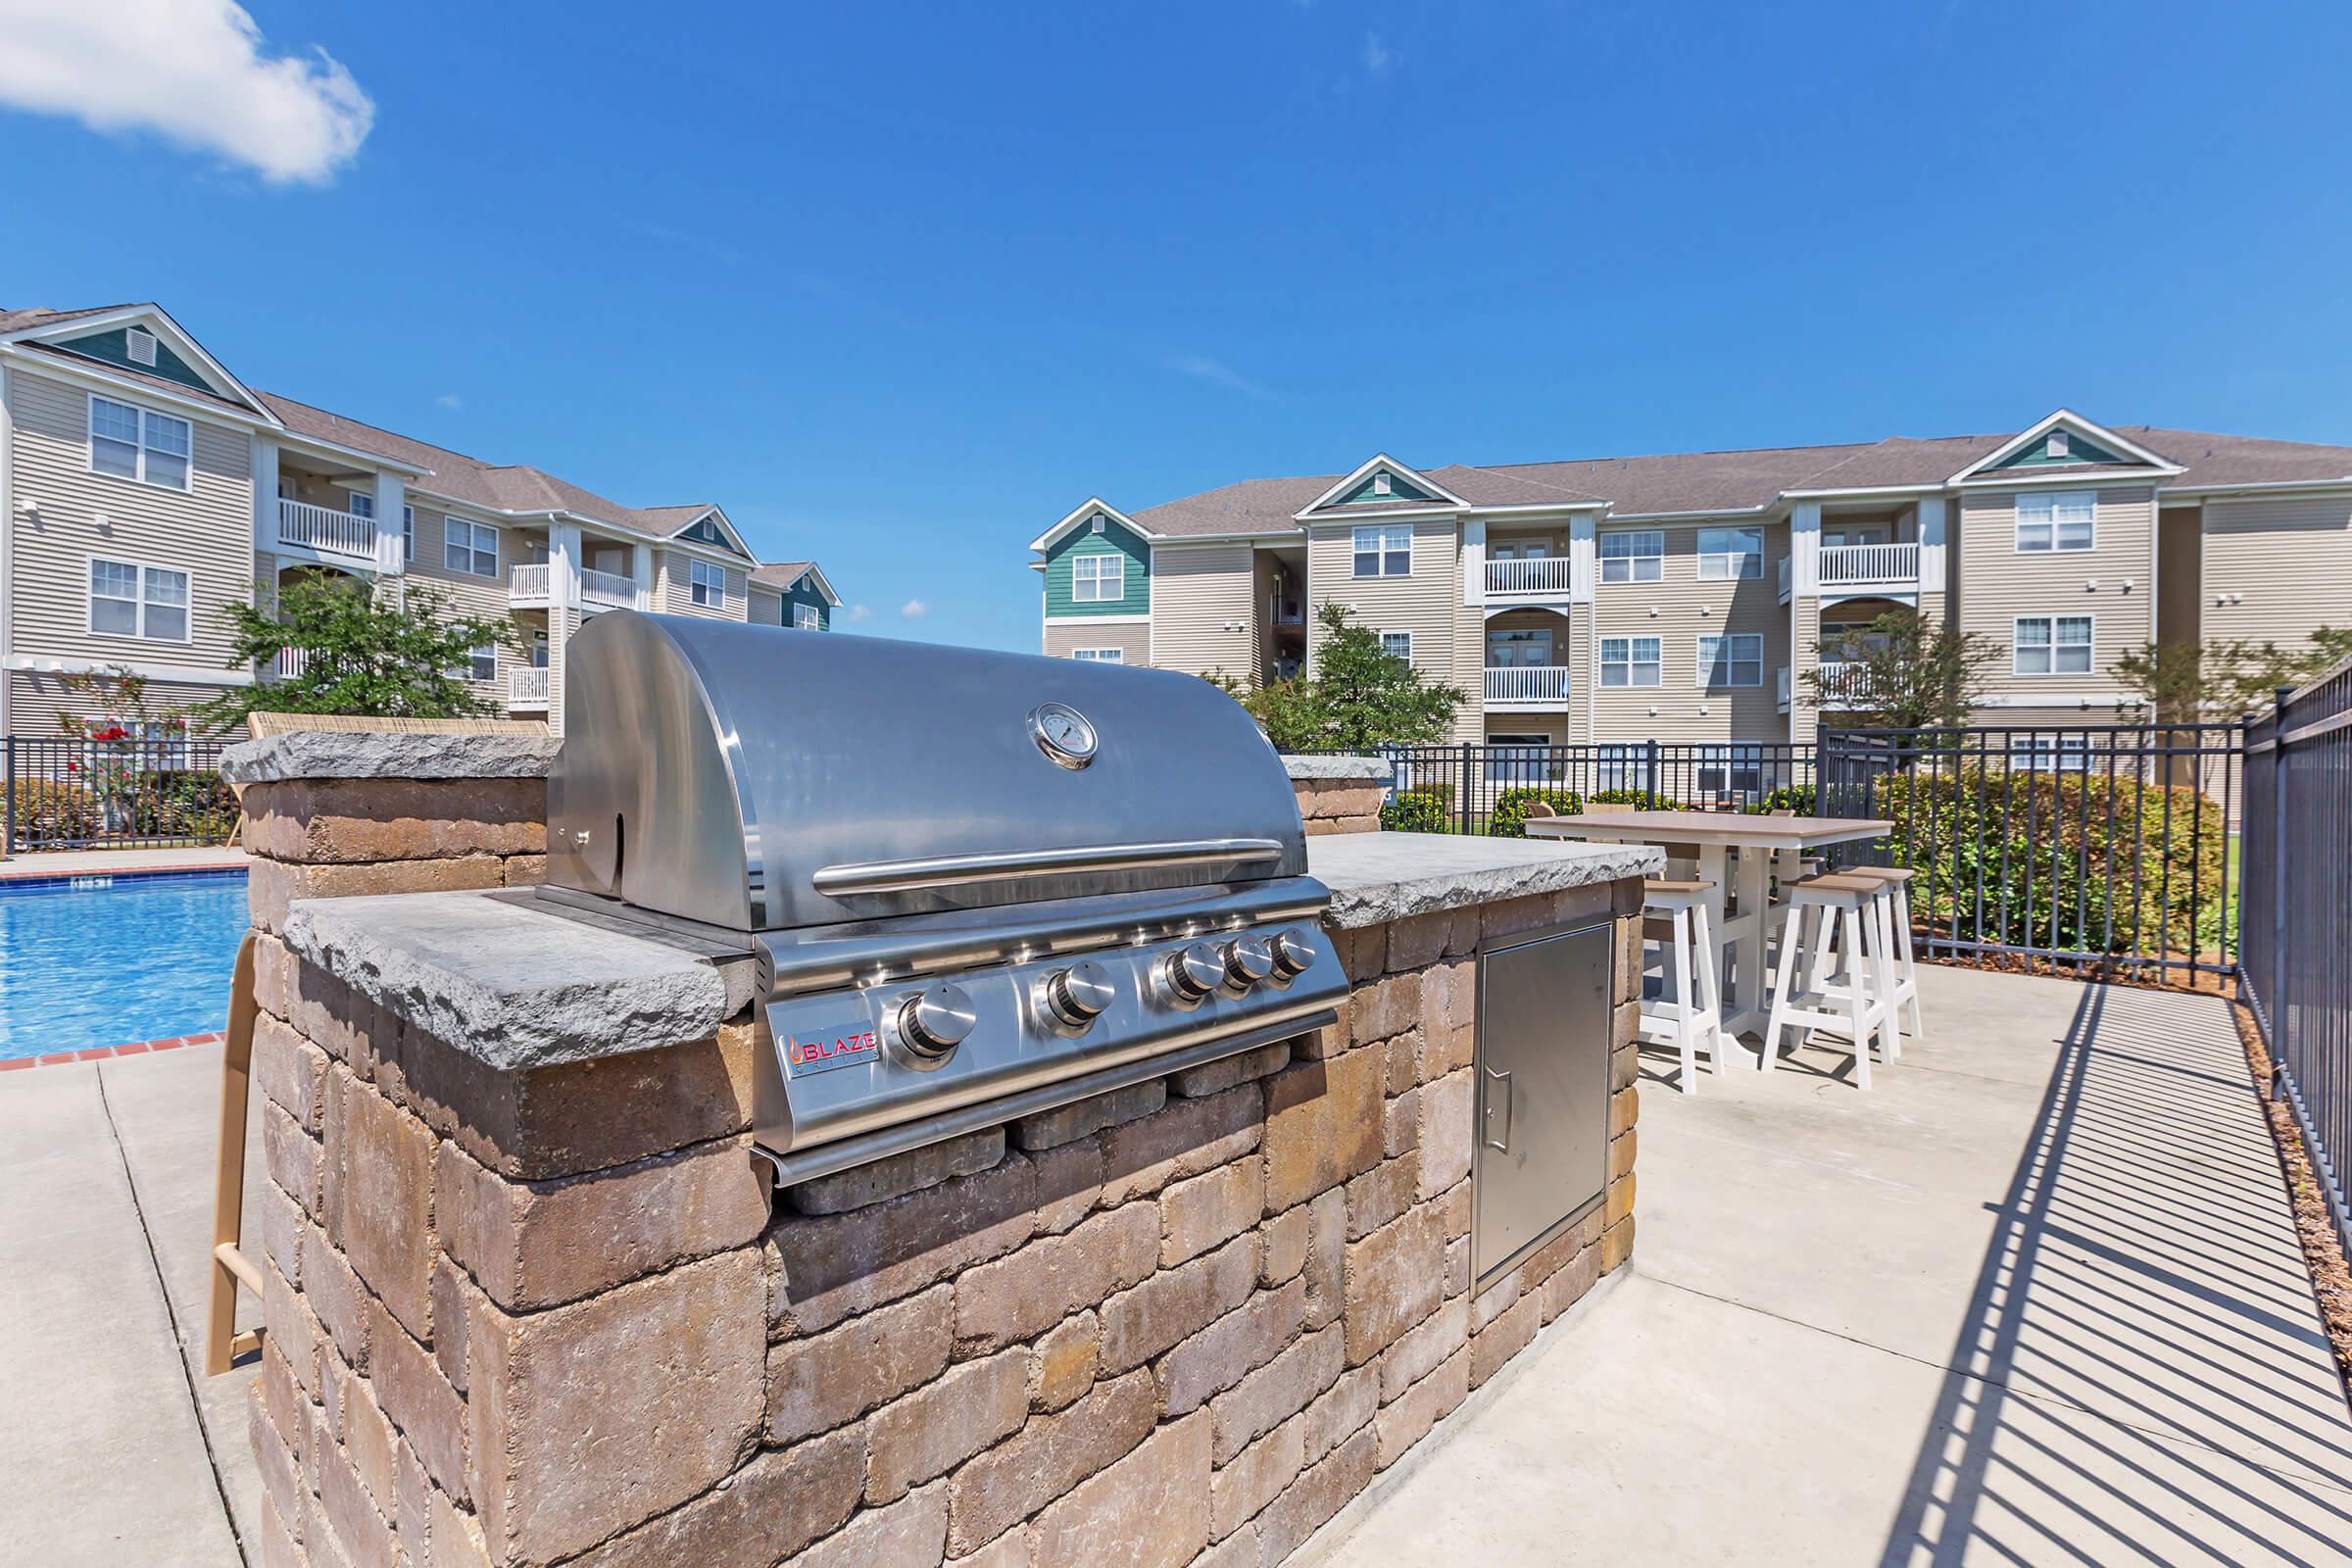 Have a Barbecue with Friends At New Providence Park In Wilmington, NC